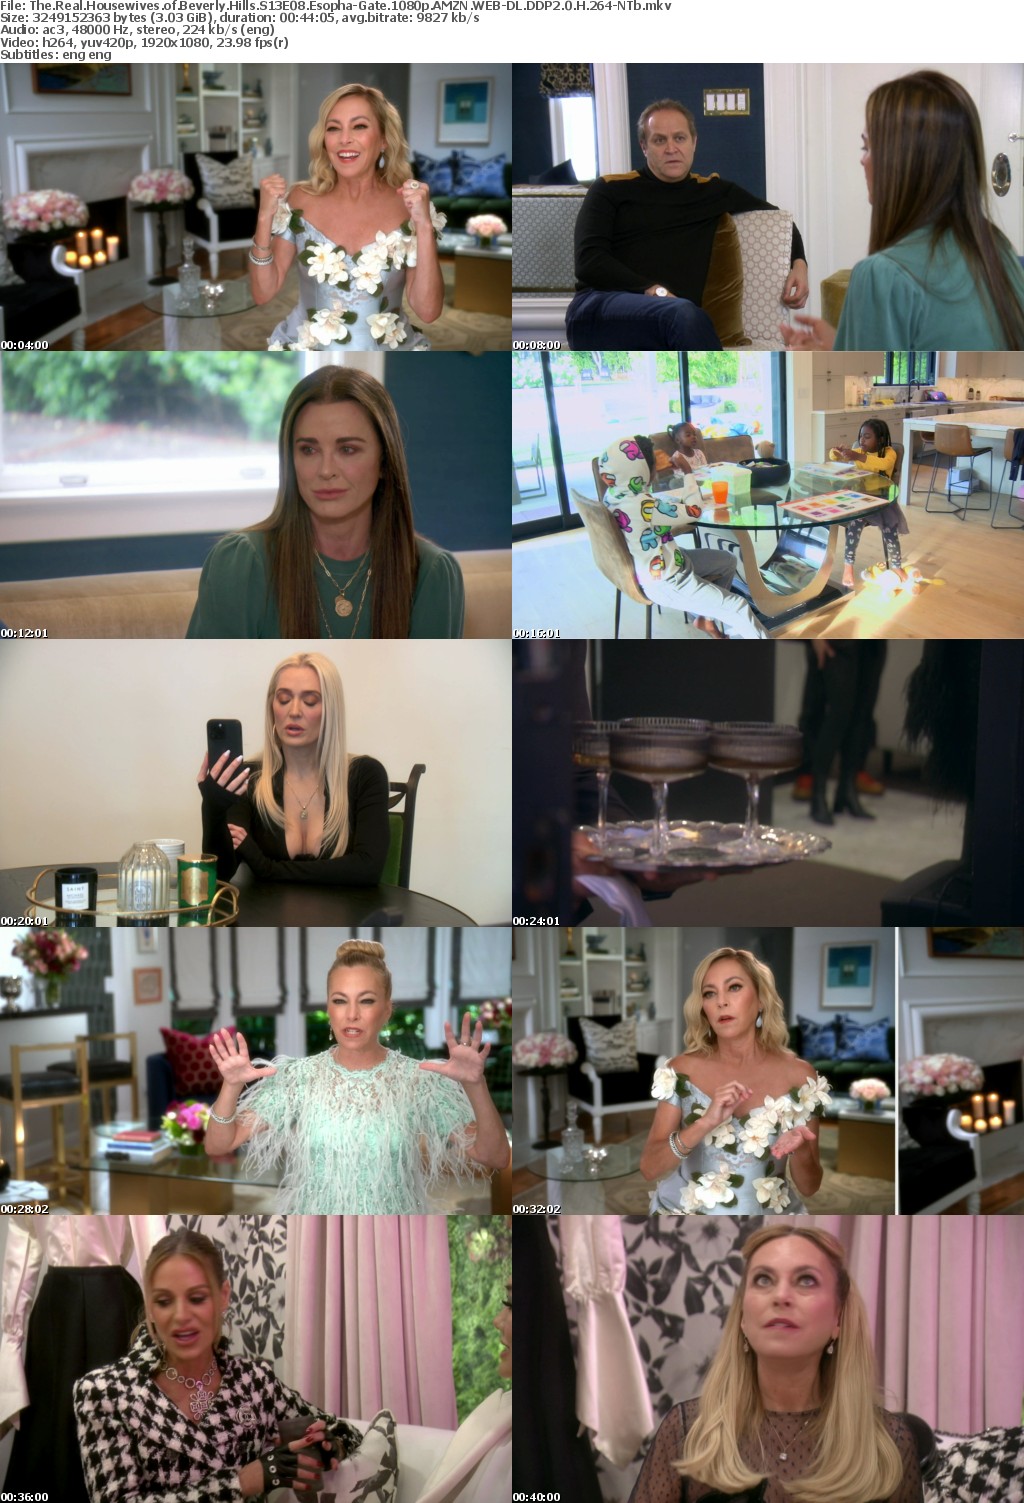 The Real Housewives of Beverly Hills S13E08 Esopha-Gate 1080p AMZN WEB-DL DDP2 0 H 264-NTb